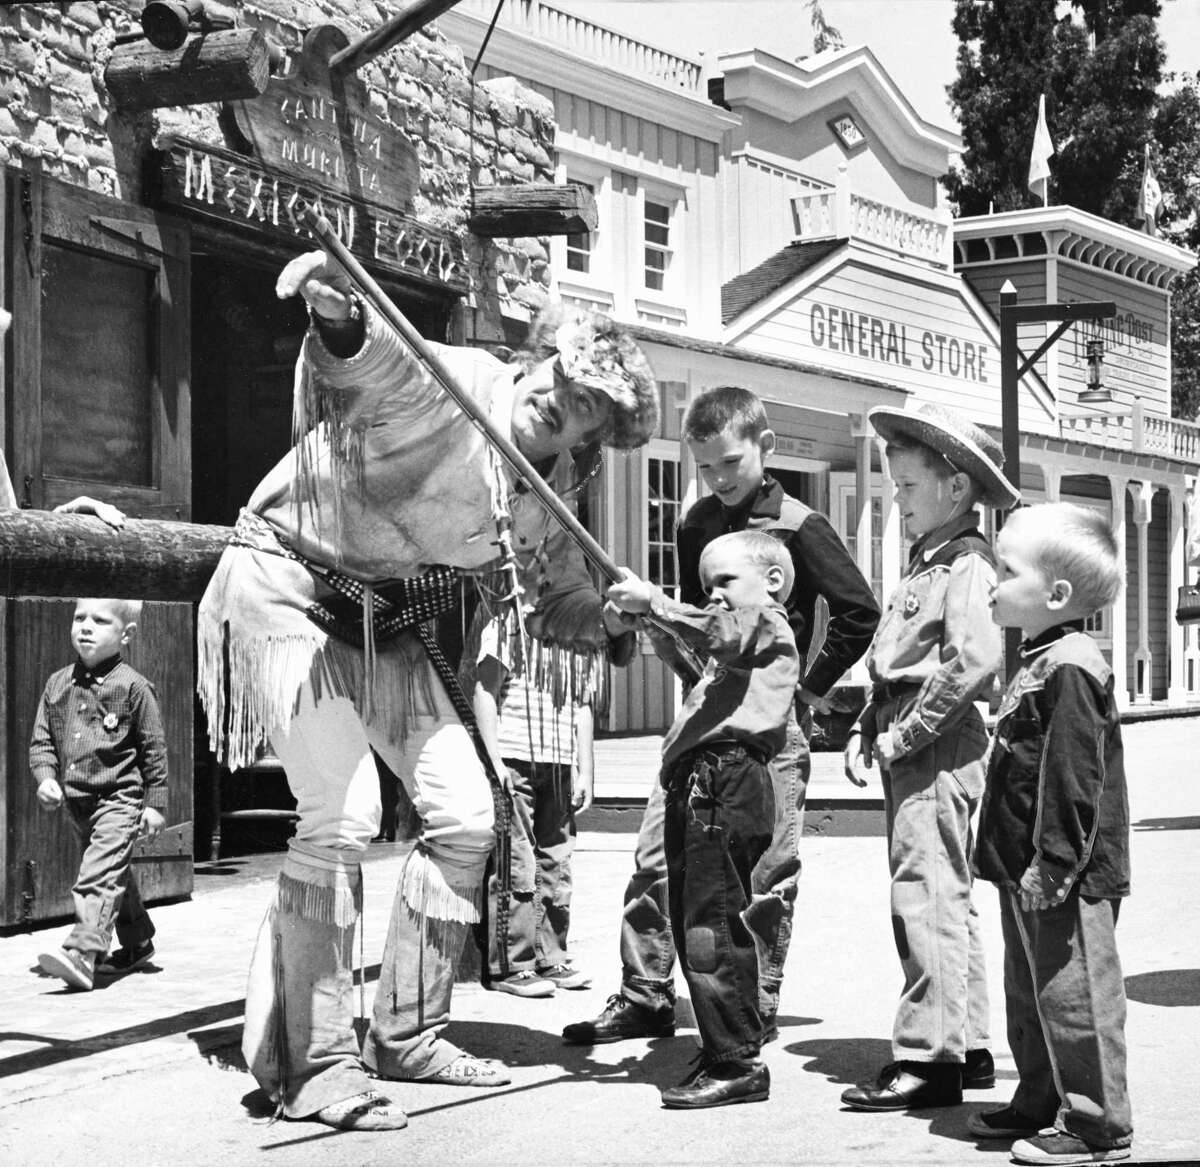 Children play with a rifle at Frontier Village, an amusement park that operated from 1961 to 1980 in San Jose.